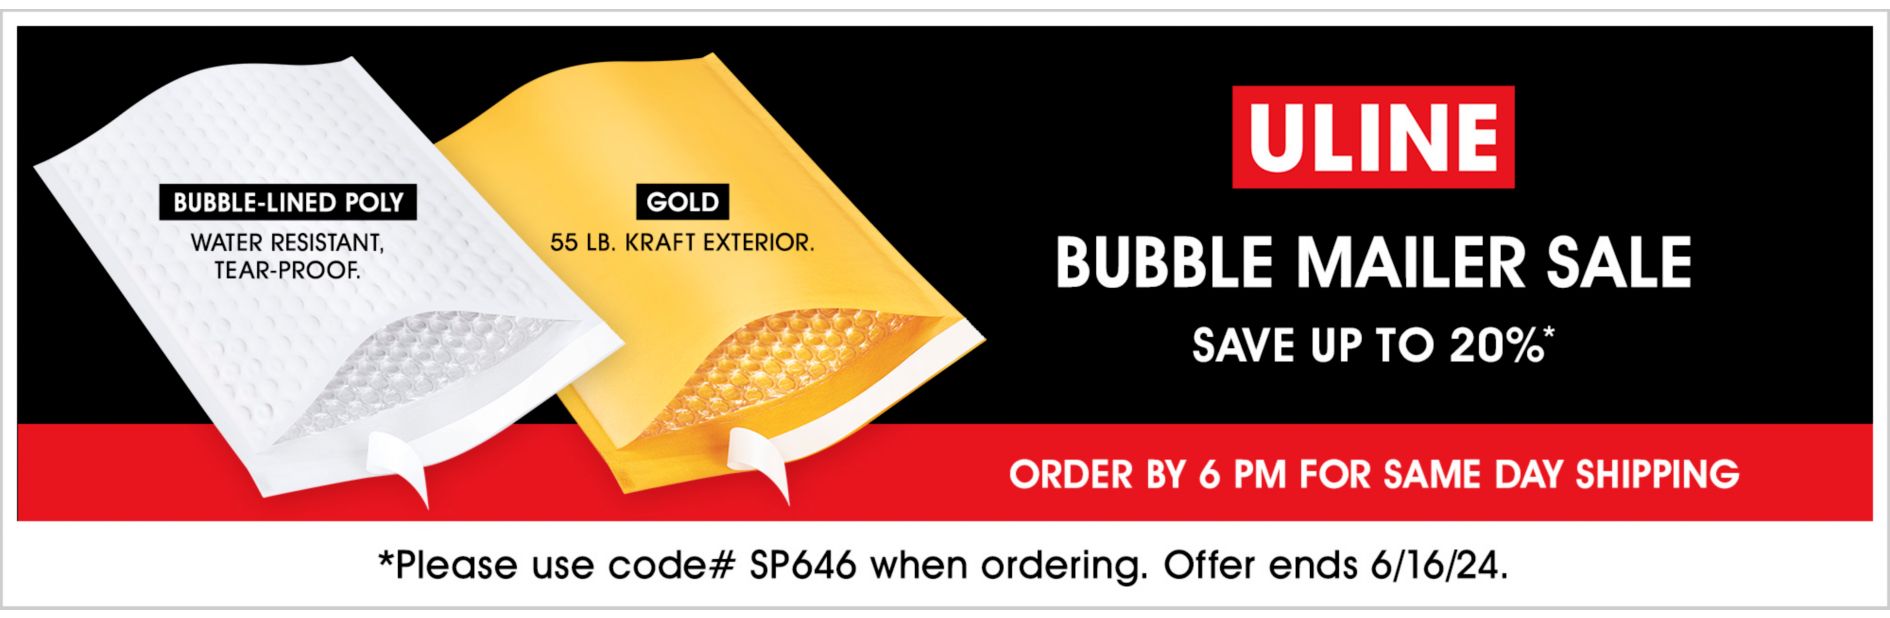 SP646 Bubble Mailers Sale, Save up to 20%, Use code SP646, Offer ends 6/16/24